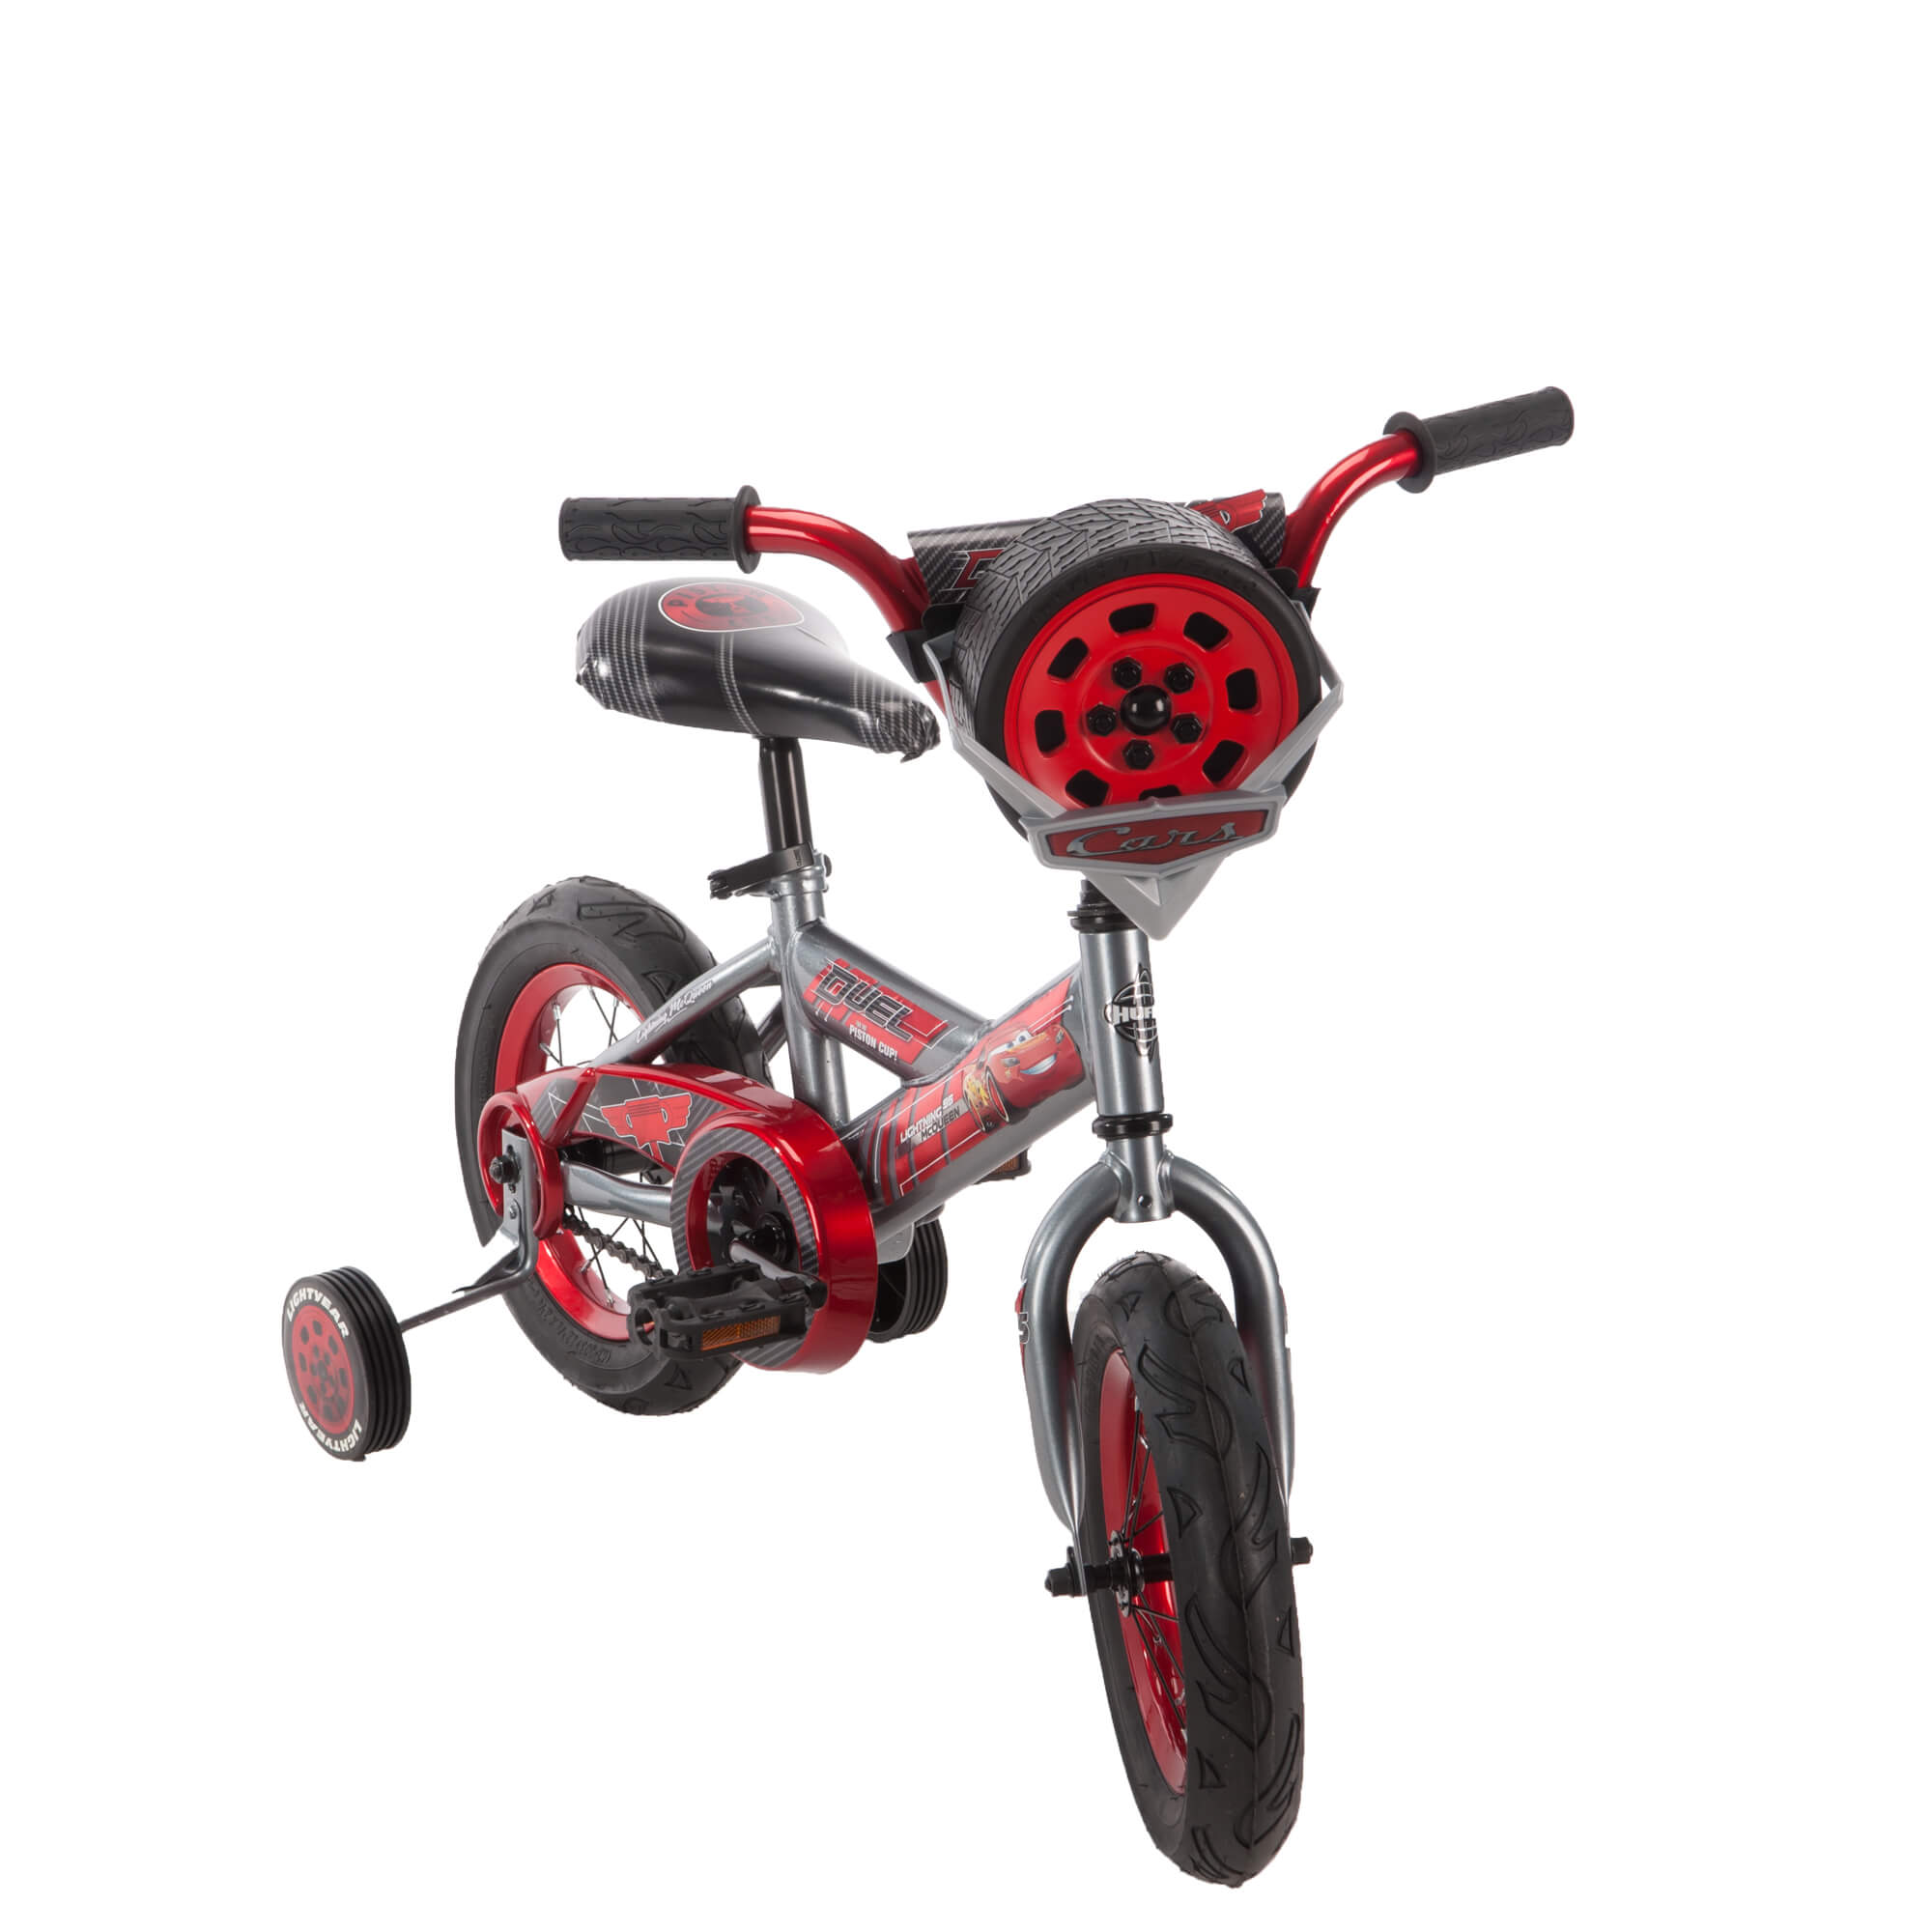 Disney Pixar Lightning McQueen 12" Boys' Red Bike with Sounds, by Huffy - image 2 of 8